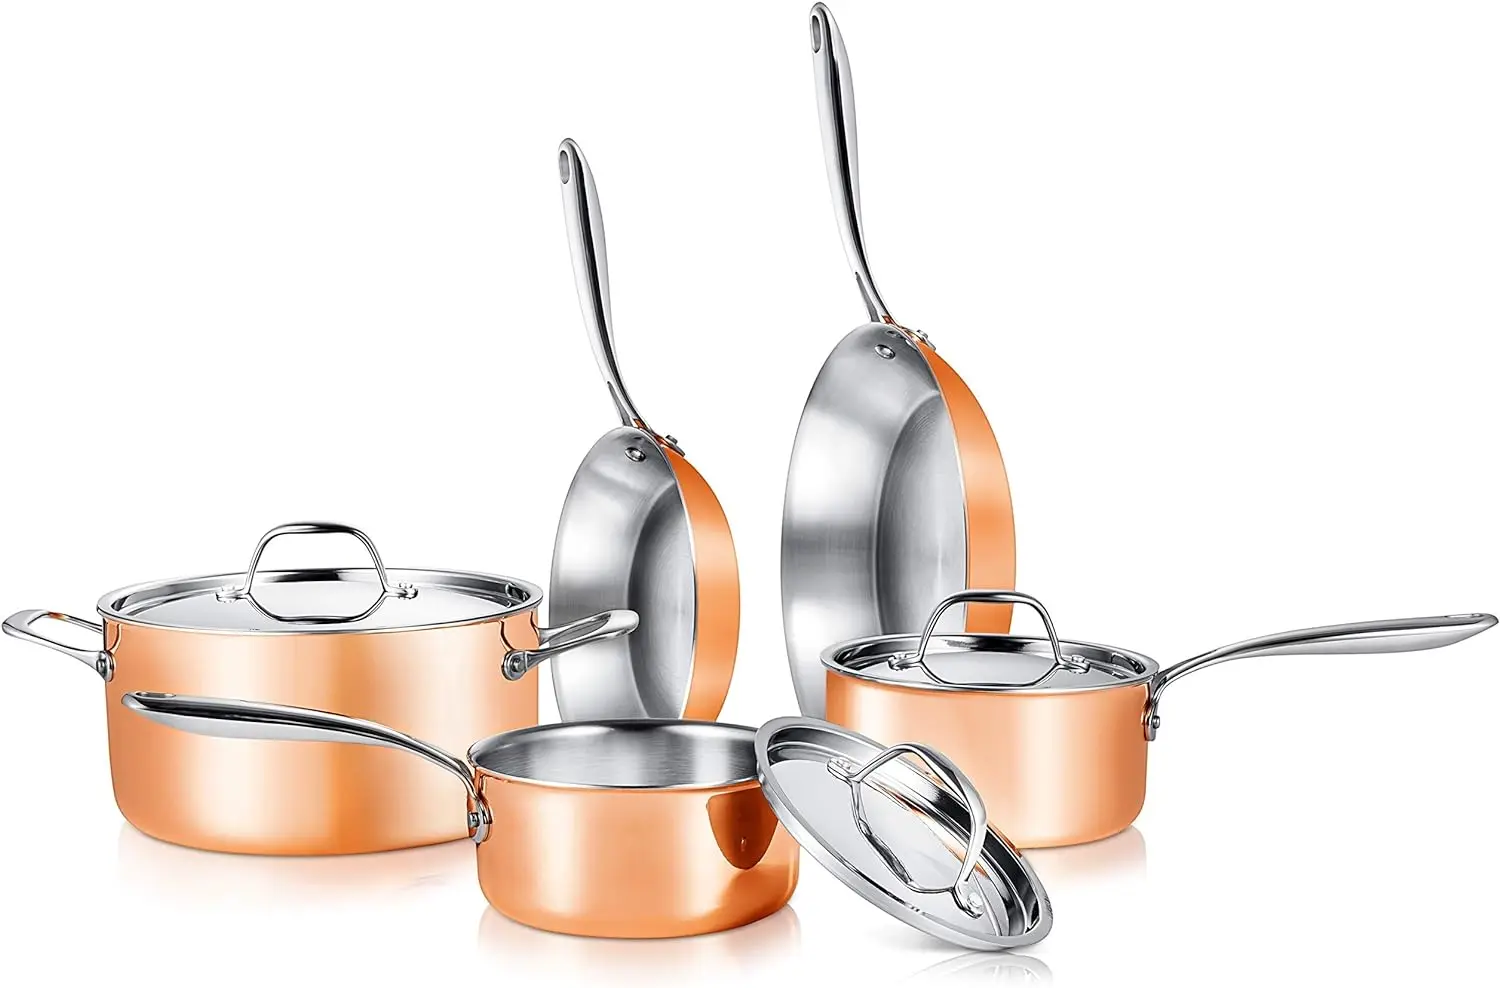 

Pcs. Stainless Steel Kitchenware Pots & Pans Set Stylish Kitchen Cookware w/Cast SS Handle, Tri-Ply Authentic Copper, for Sa Alu